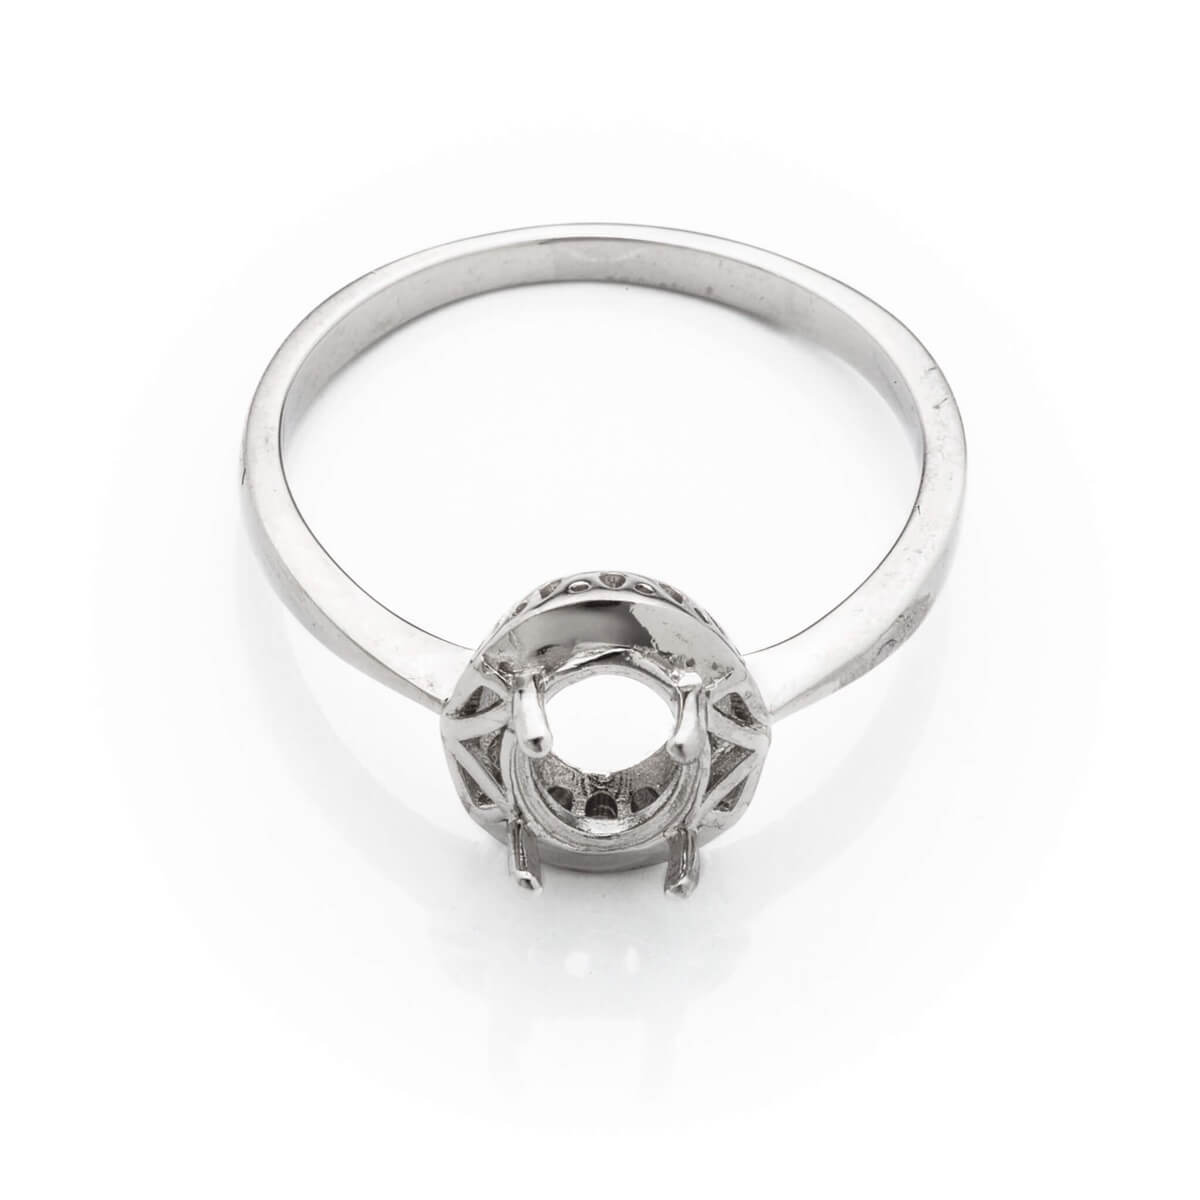 Ring with Oval Prongs Mounting in Sterling Silver 5x7mm